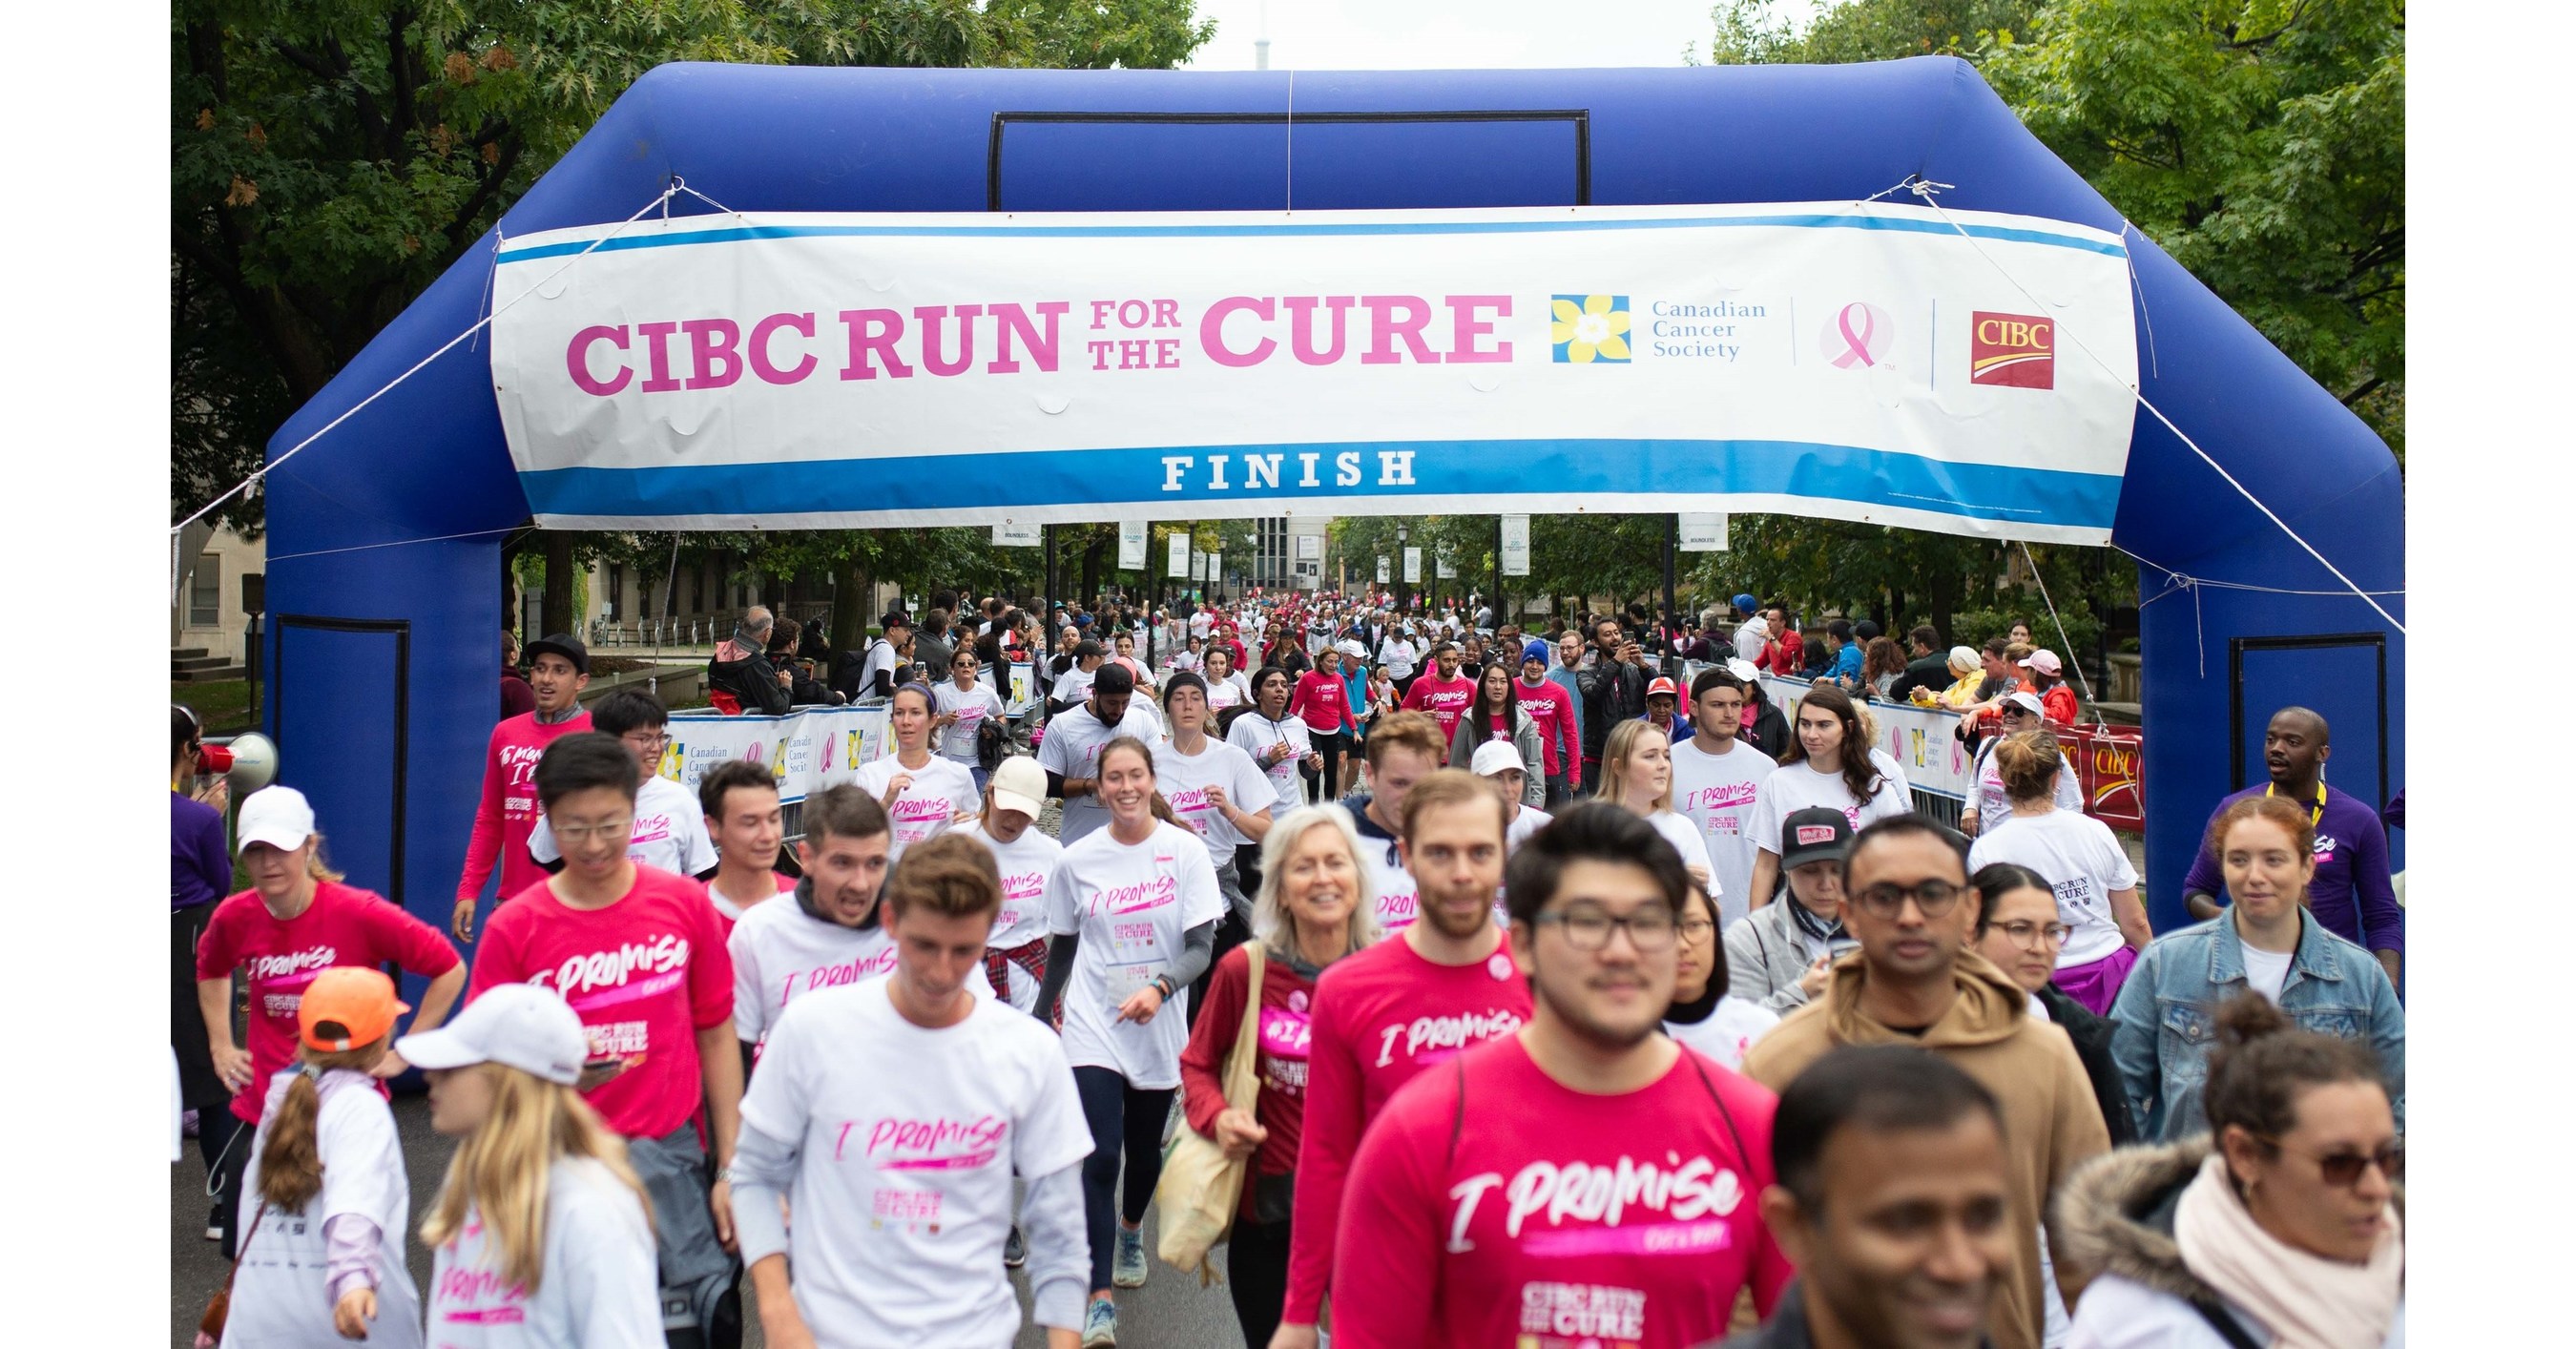 Canadians raise 17 million at the Canadian Cancer Society CIBC Run for